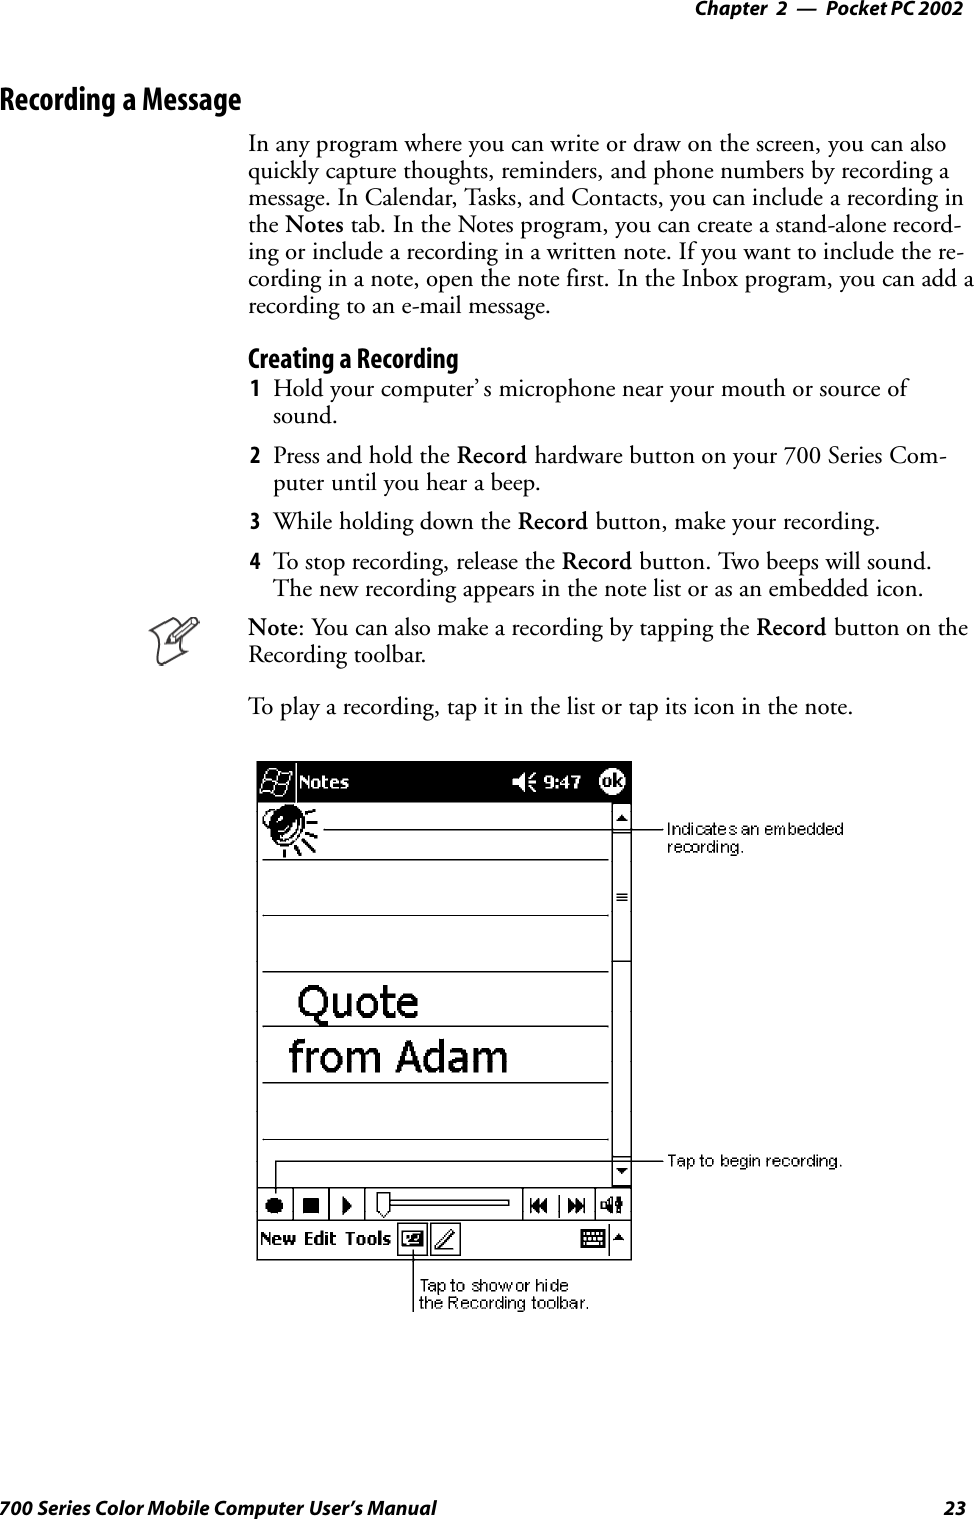 Pocket PC 2002—Chapter 223700 Series Color Mobile Computer User’s ManualRecording a MessageIn any program where you can write or draw on the screen, you can alsoquickly capture thoughts, reminders, and phone numbers by recording amessage. In Calendar, Tasks, and Contacts, you can include a recording inthe Notes tab. In the Notes program, you can create a stand-alone record-ing or include a recording in a written note. If you want to include the re-cording in a note, open the note first. In the Inbox program, you can add arecording to an e-mail message.Creating a Recording1Hold your computer’ s microphone near your mouth or source ofsound.2Press and hold the Record hardware button on your 700 Series Com-puter until you hear a beep.3While holding down the Record button, make your recording.4To stop recording, release the Record button. Two beeps will sound.The new recording appears in the note list or as an embedded icon.Note: You can also make a recording by tapping the Record button on theRecording toolbar.To play a recording, tap it in the list or tap its icon in the note.